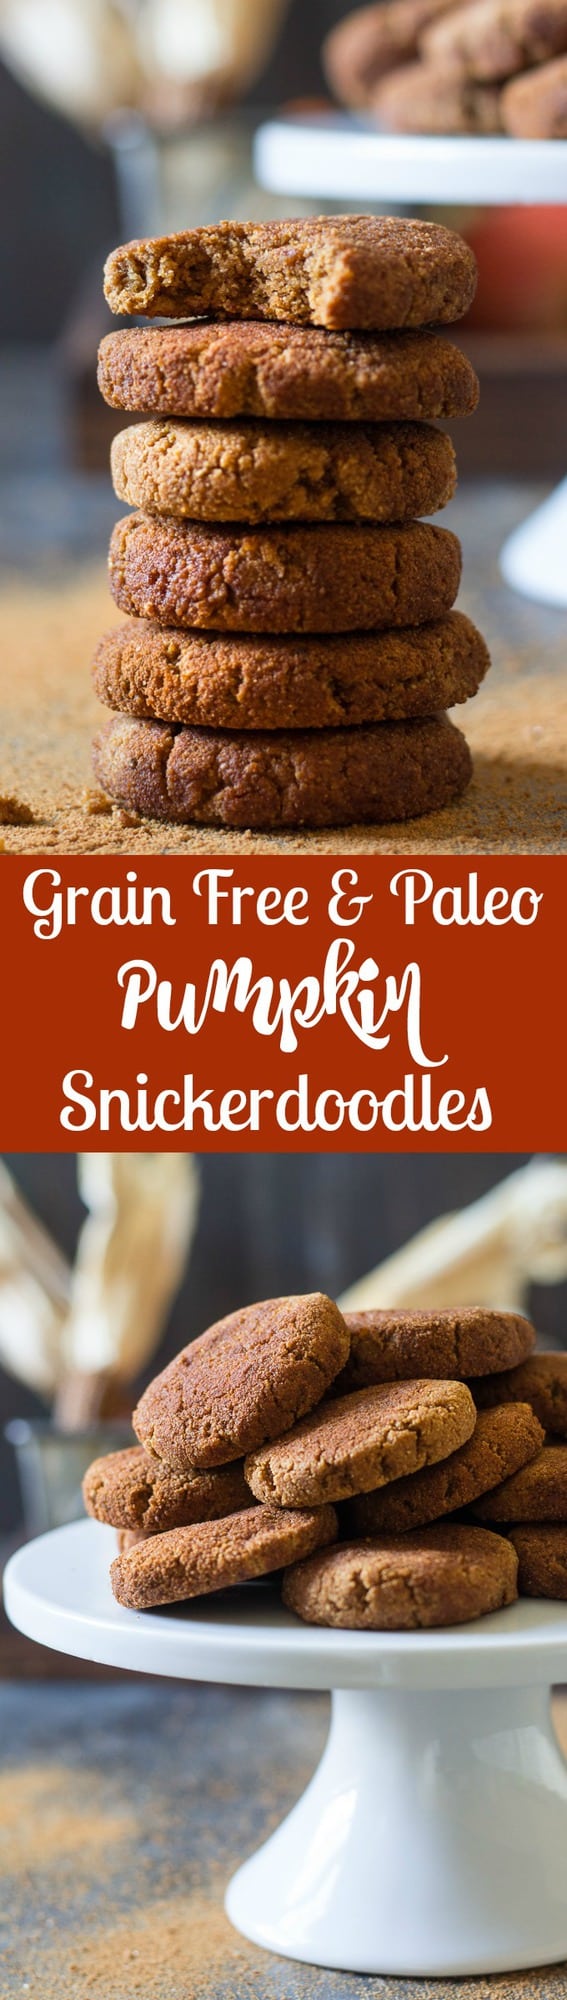 Super soft grain free and paleo pumpkin snickerdoodles that are super easy, kid friendly and packed with vanilla cinnamon sugar flavor! Gluten free, dairy free, refined sugar free and perfect for healthy holiday cookies! 